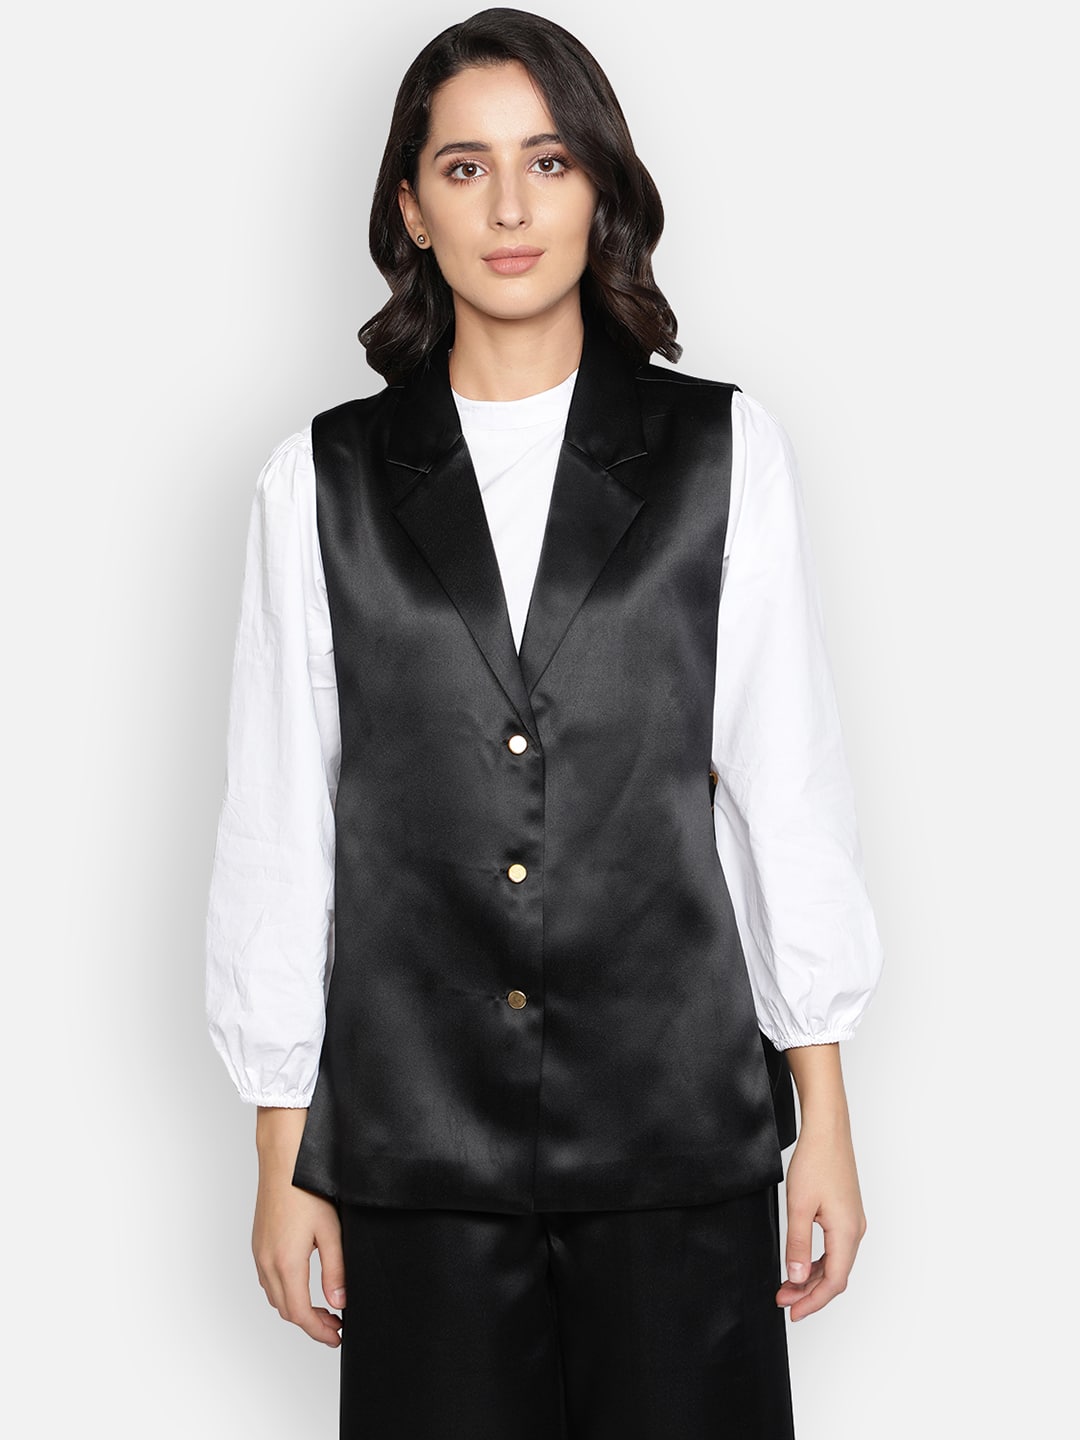 Waistcoat With Side Vents